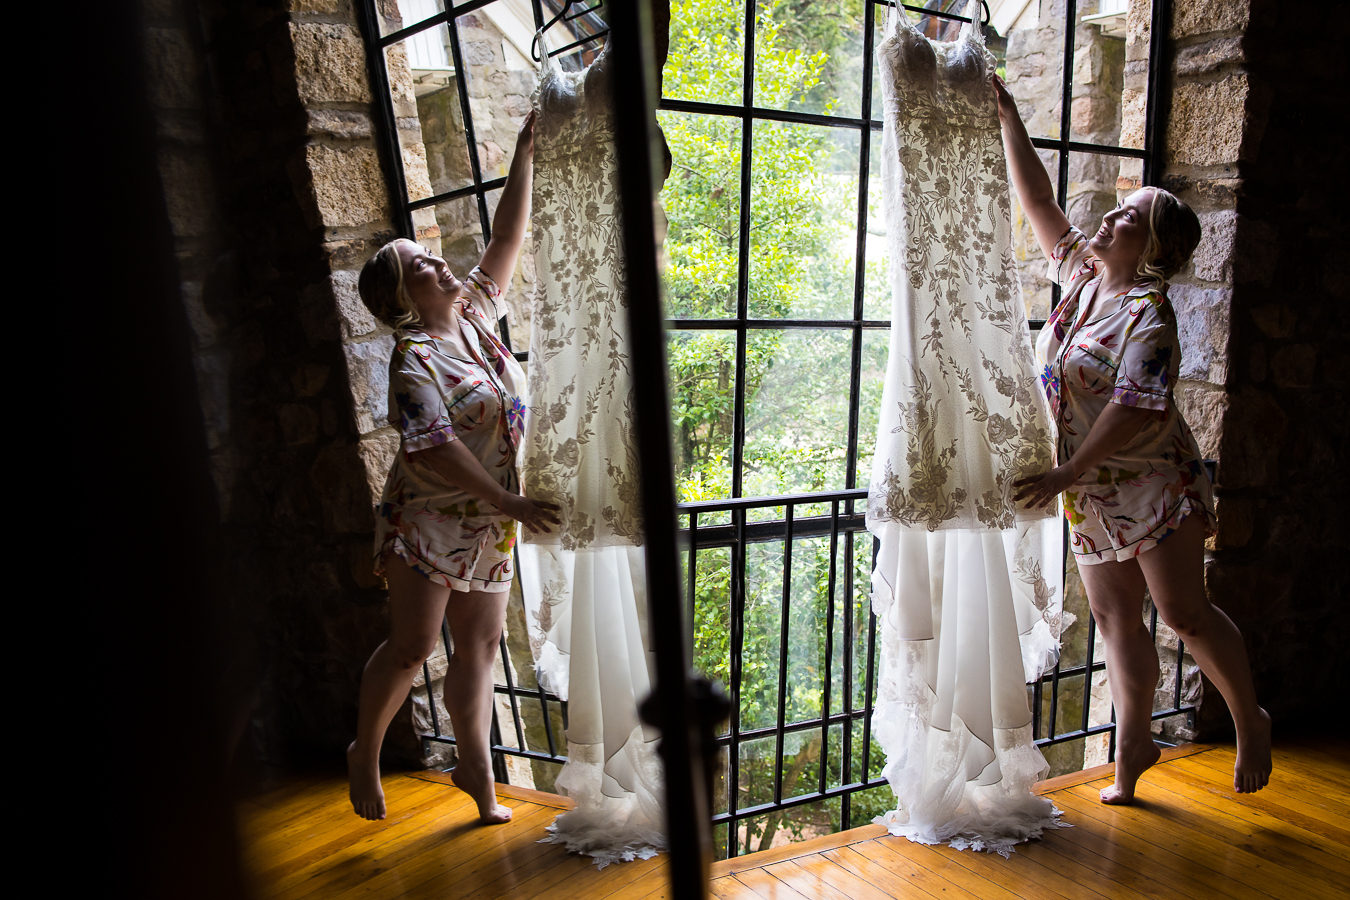 creative photographer, lisa rhinehart, captures this image of the bride as she reaches for her dress caught through the reflection in the mirror